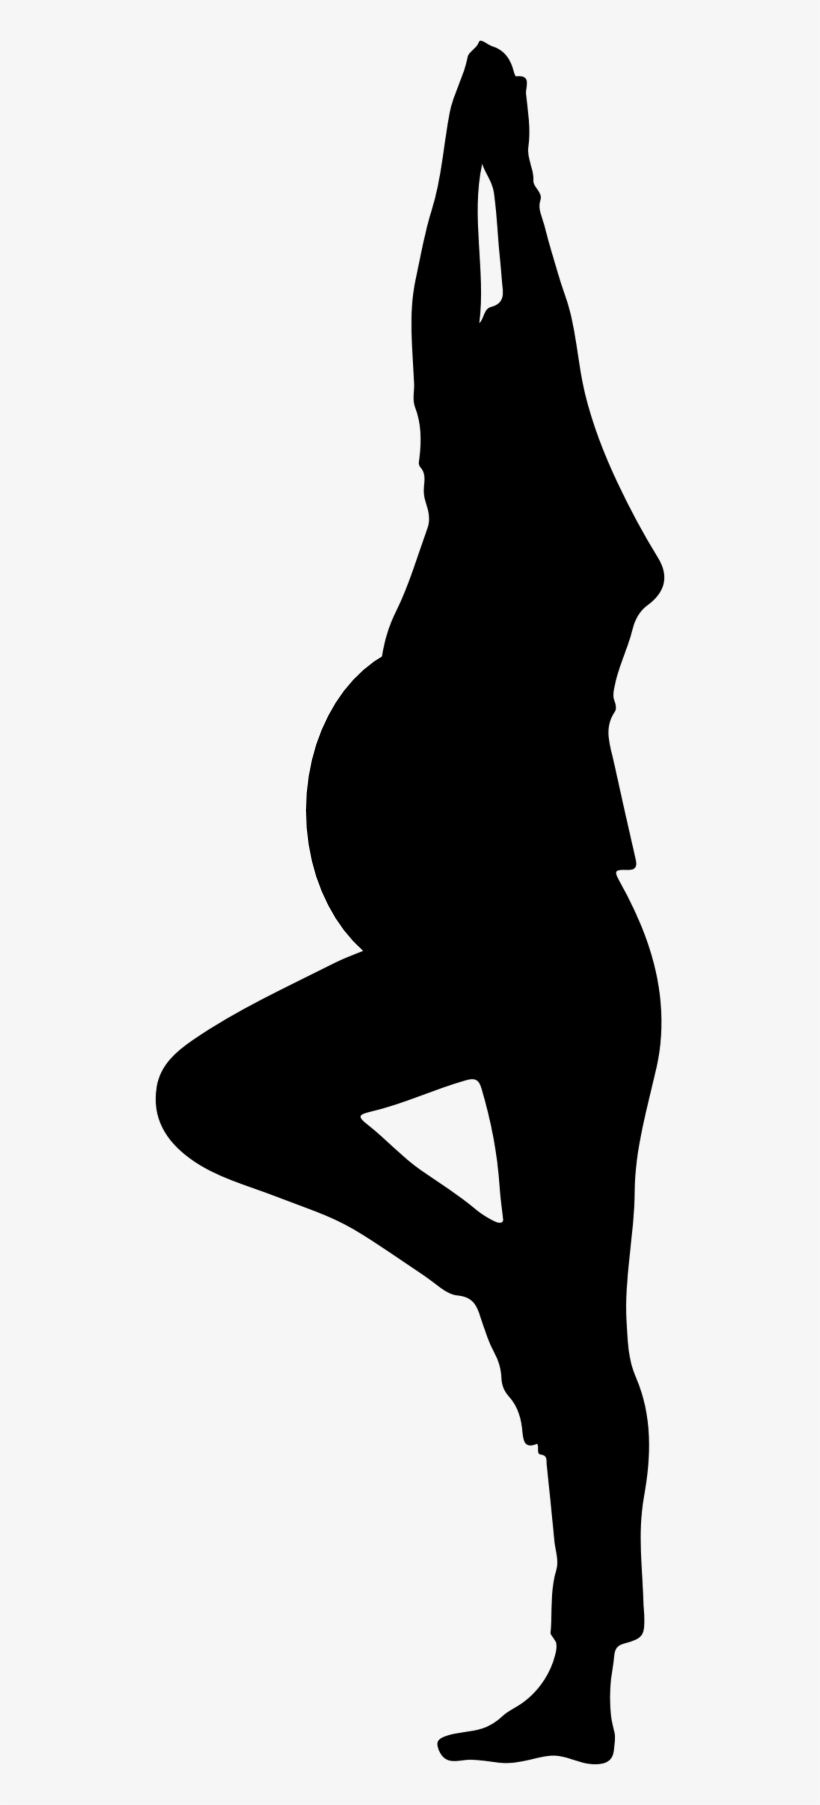 All Trimesters Welcome Mix Of Stretch, Strength, Breath - Yoga Pregnancy Silhouette Png, transparent png #1342510